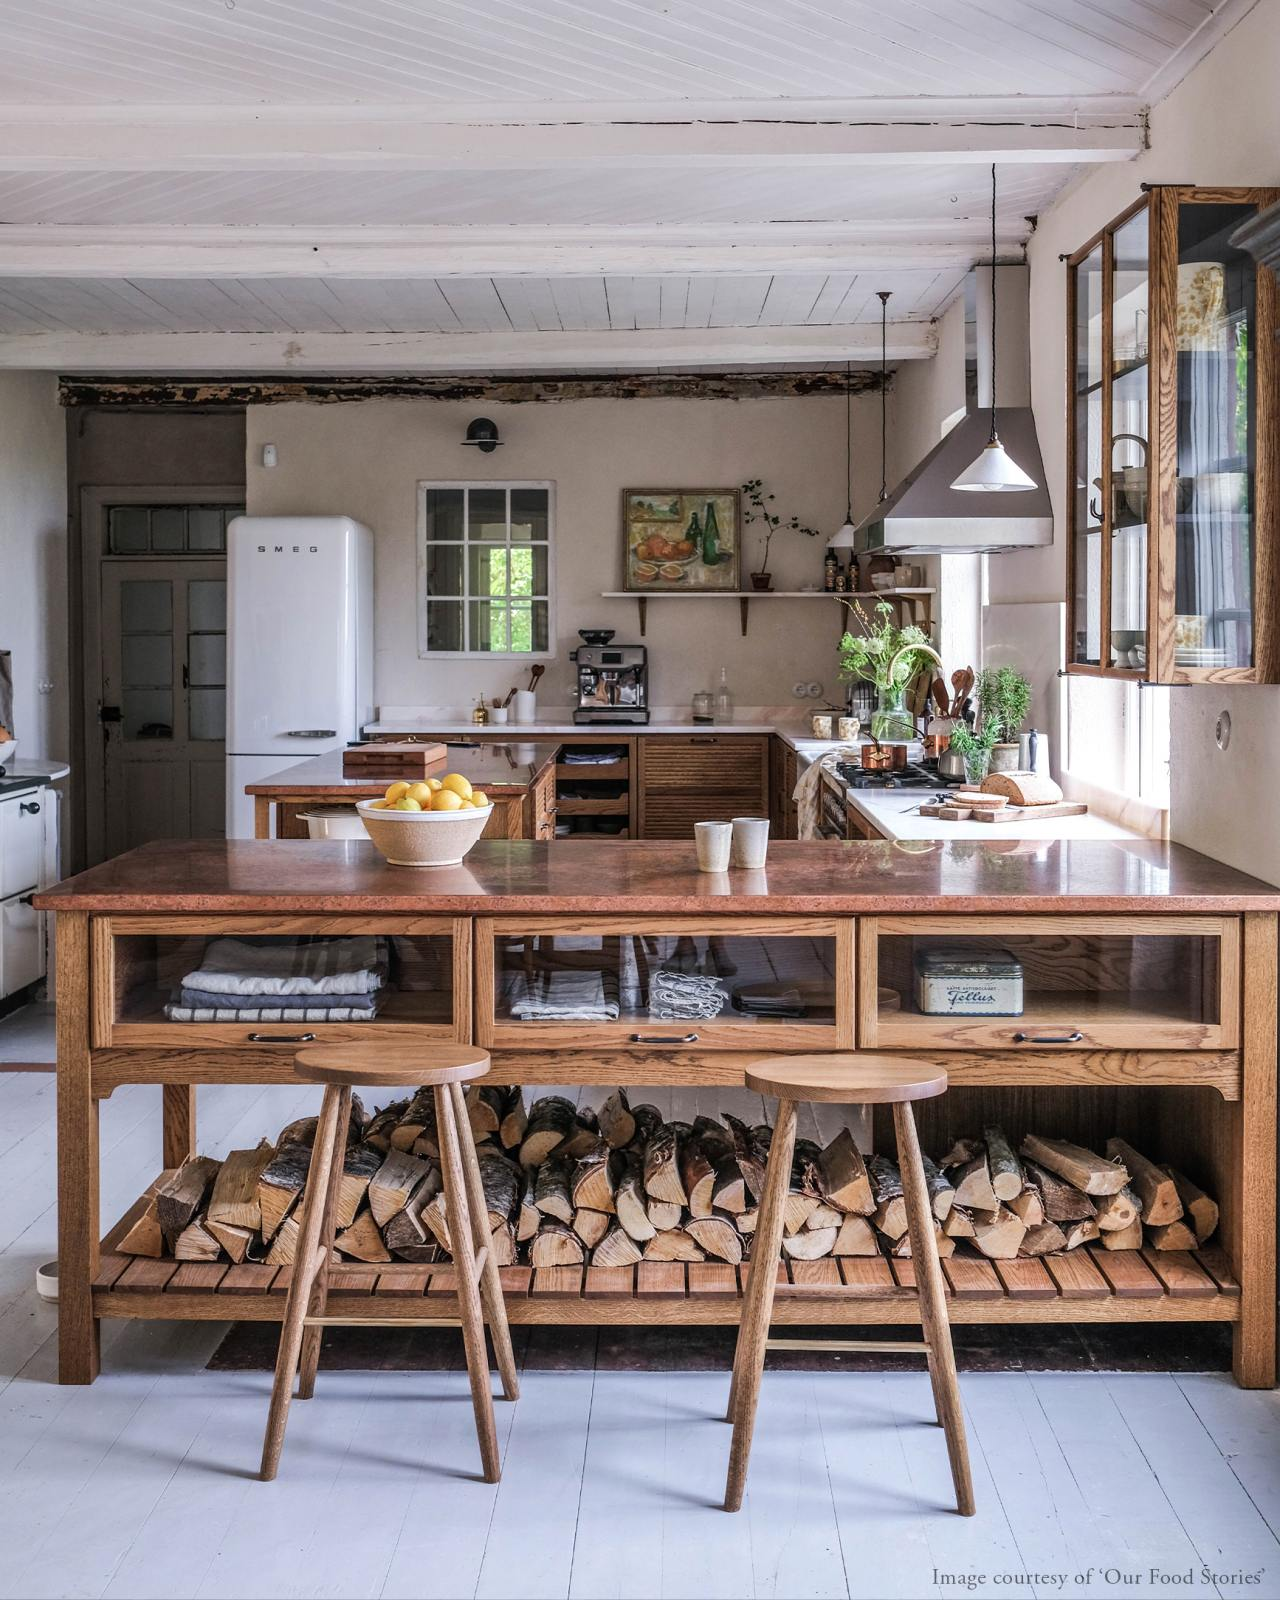 Our Food Stories - deVOL designed Helen stools in a wonderful English country kitchen with rustic elegance.